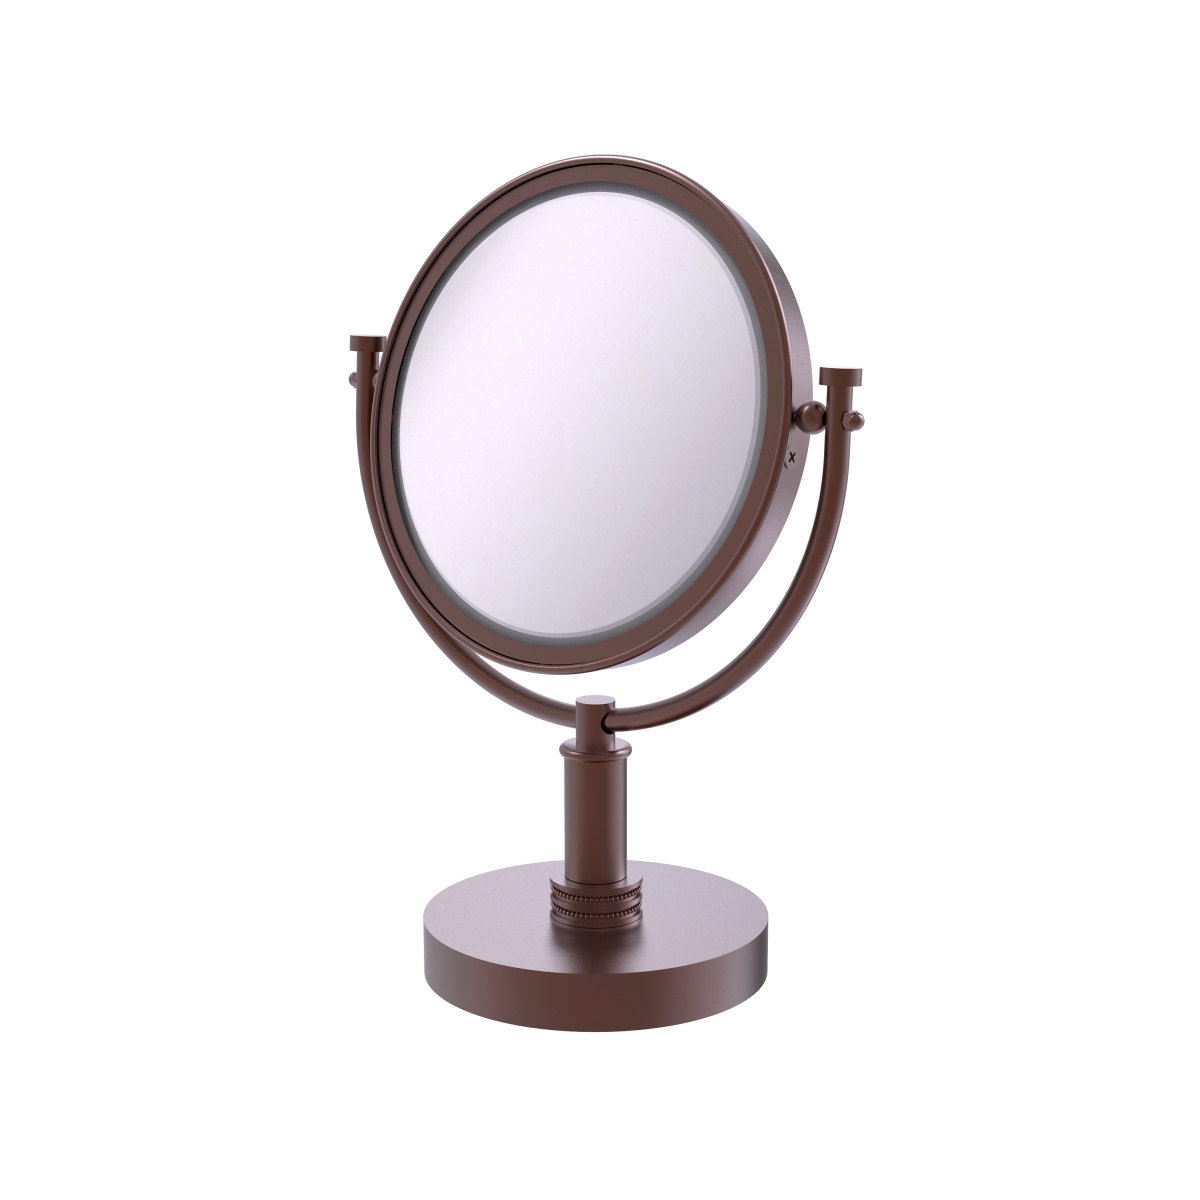 Picture of Allied Brass DM-4D-5X-CA 8 in. Vanity Top Make-Up Mirror 5X Magnification, Antique Copper - 15 x 8 x 8 in.